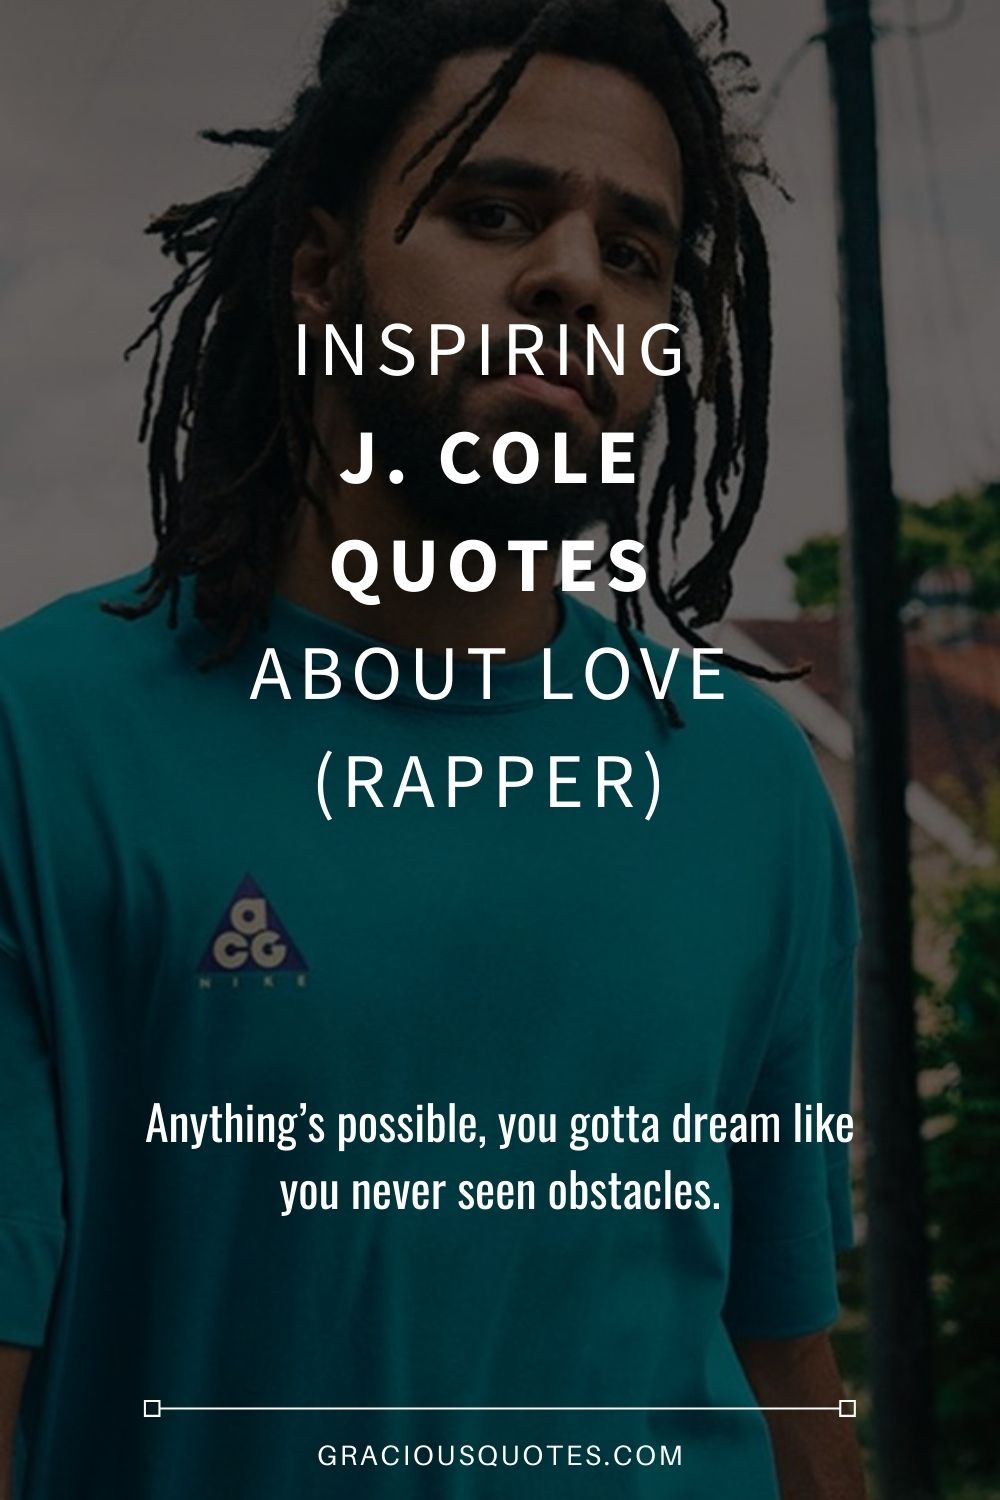 Inspiring J. Cole Quotes About Love (RAPPER) - Gracious Quotes